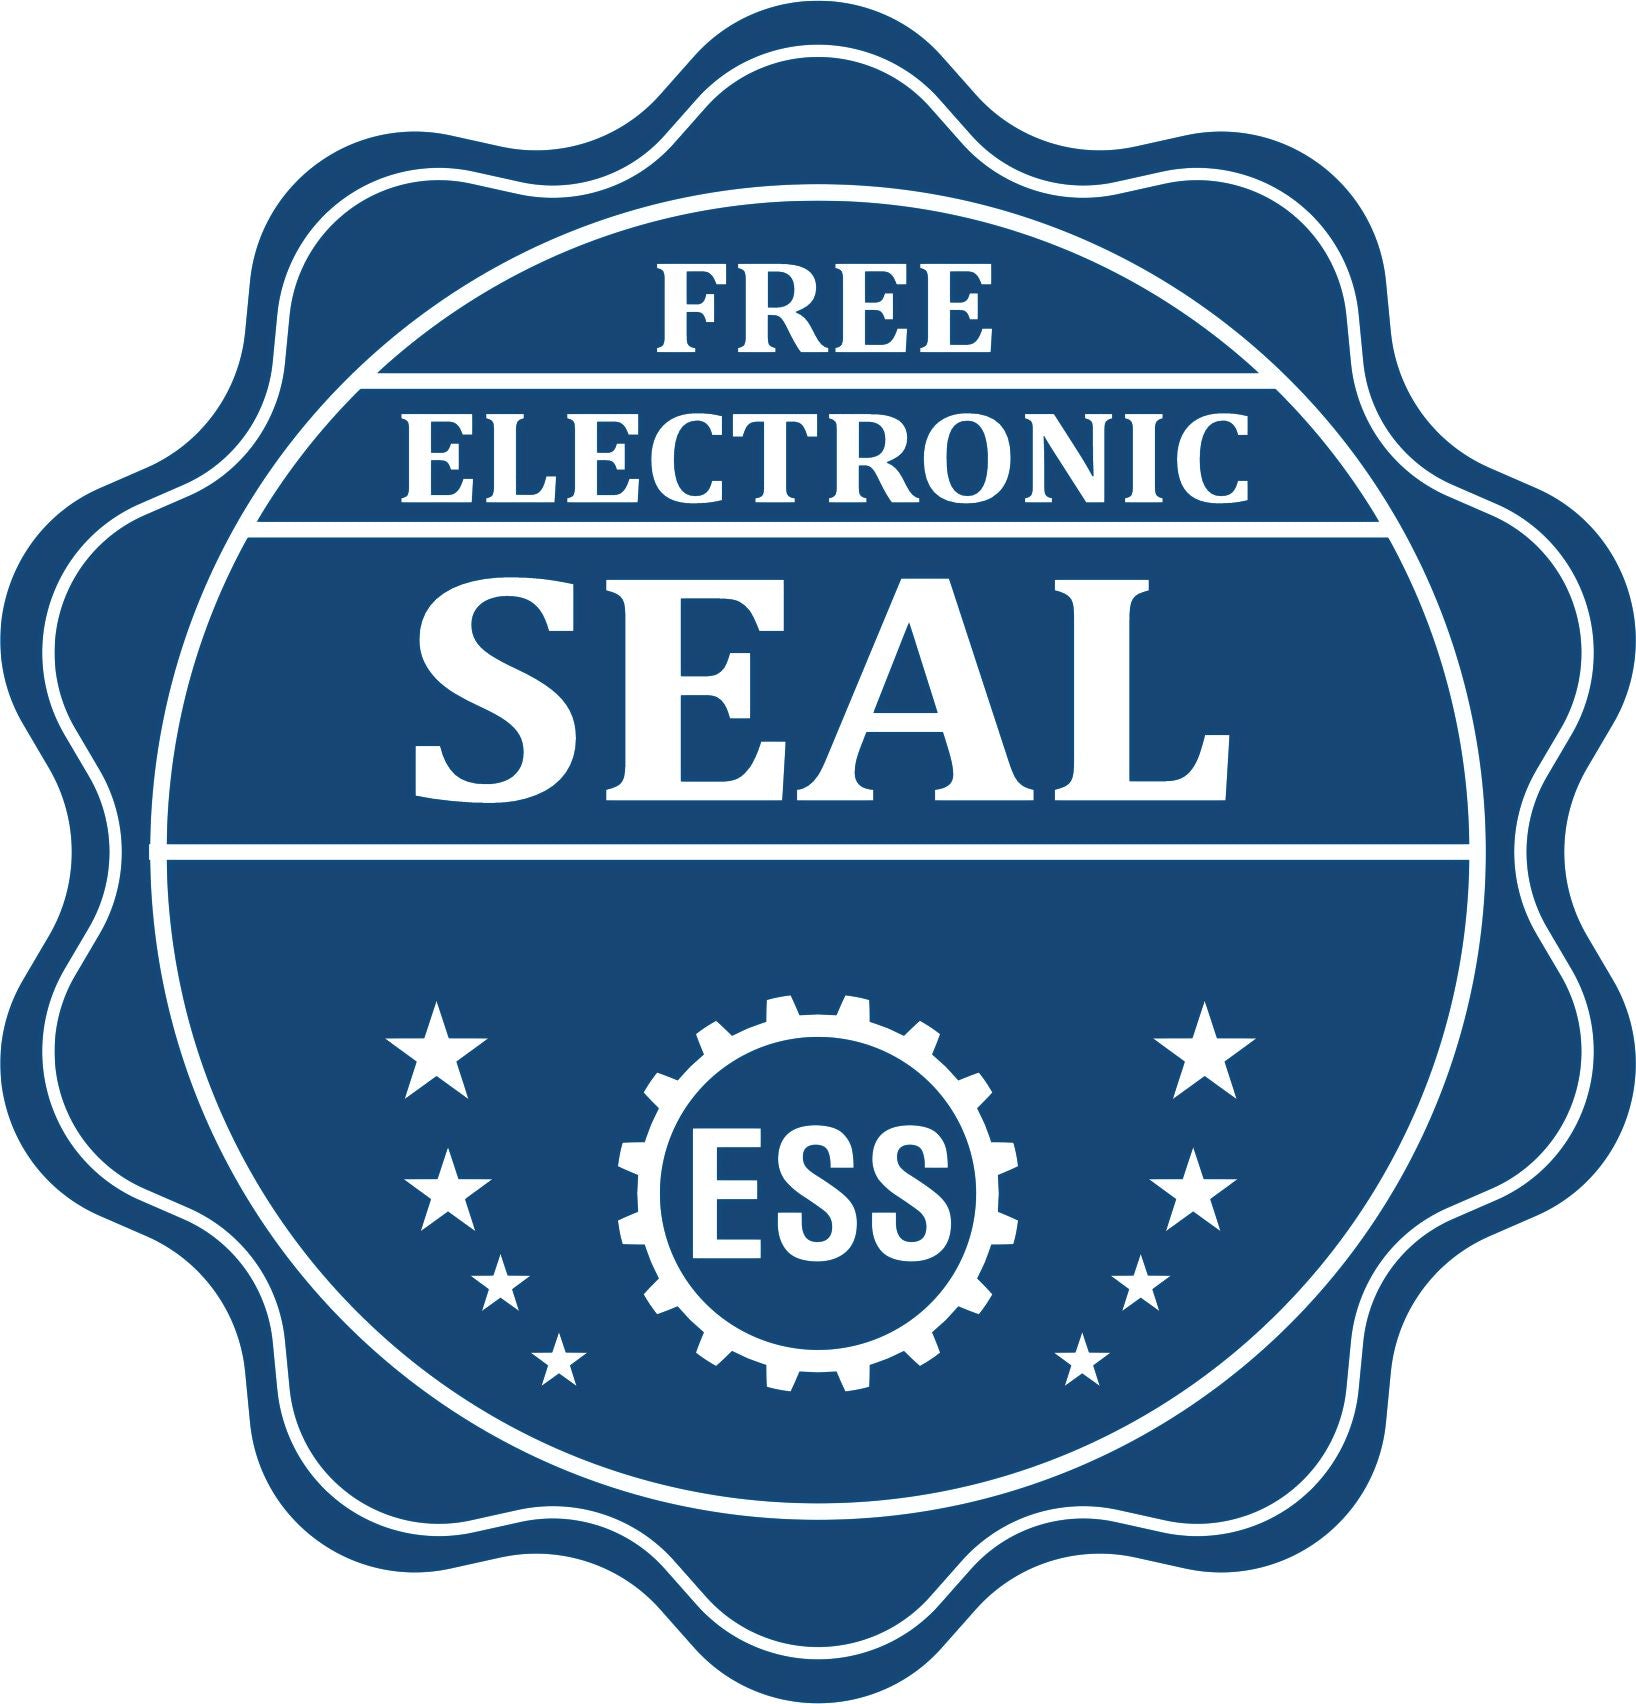 A badge showing a free electronic seal for the Gift Georgia Landscape Architect Seal with stars and the ESS gear on the emblem.